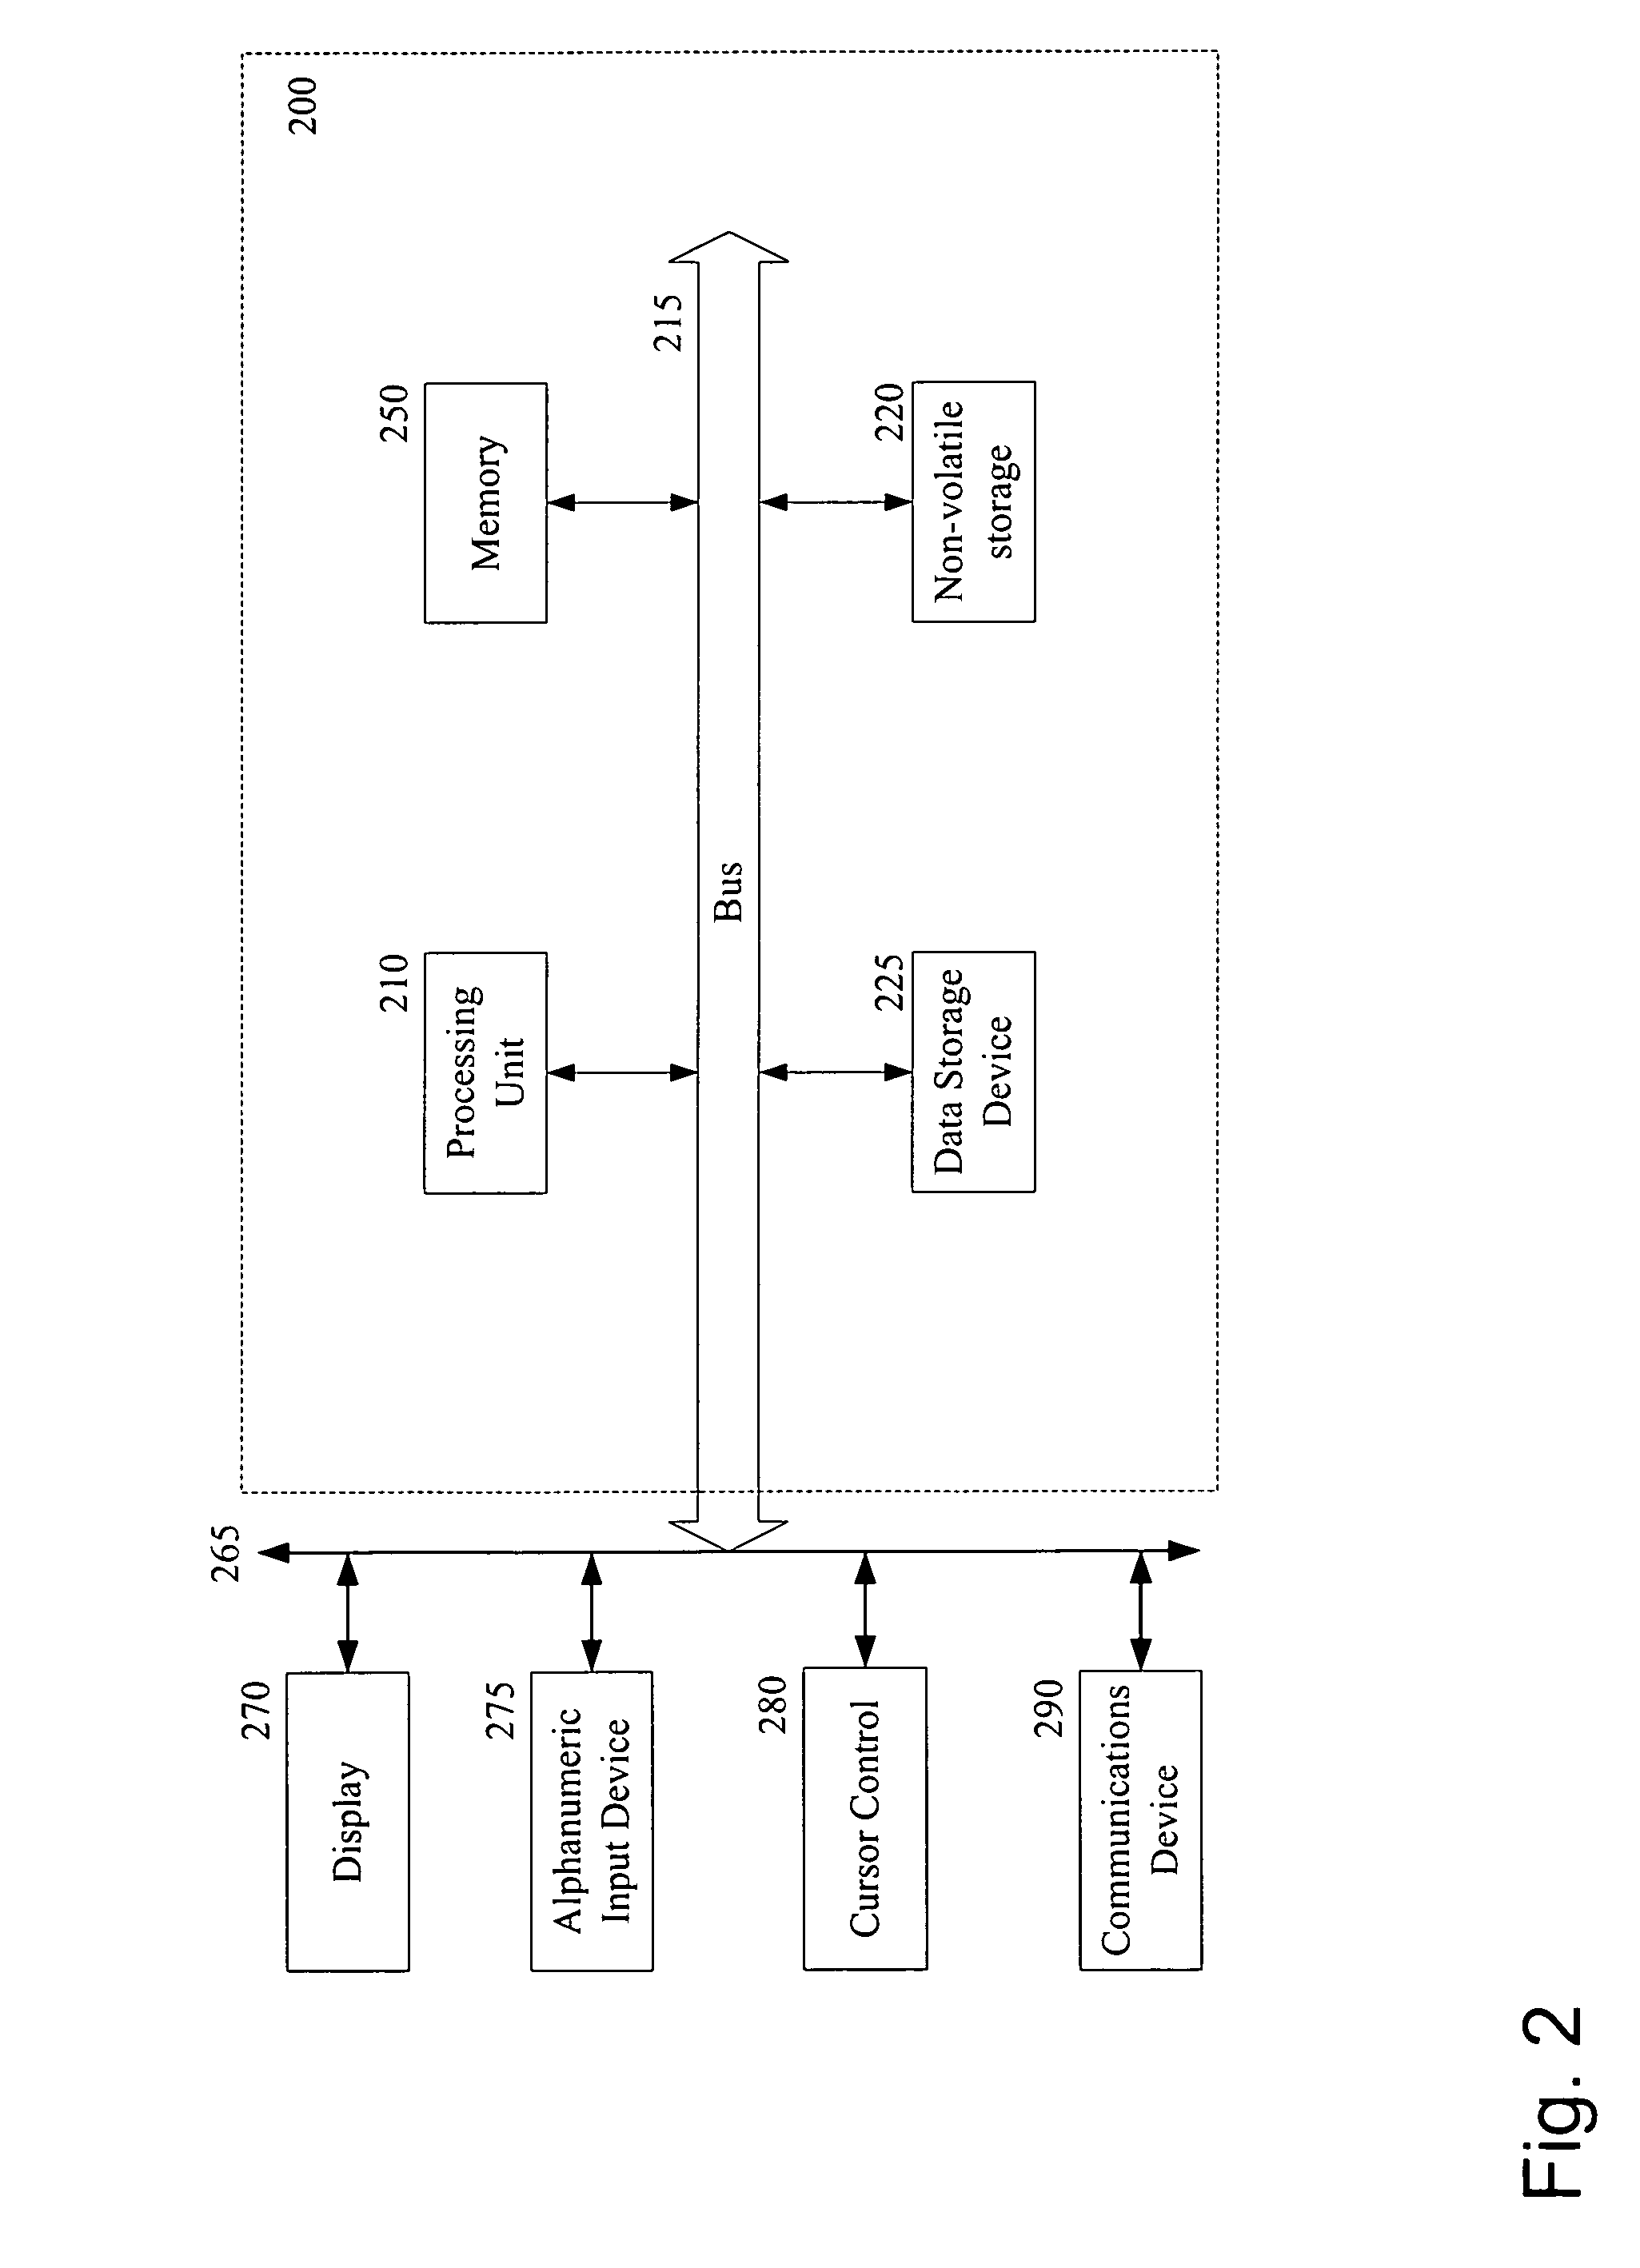 Method and apparatus for an improved computer aided diagnosis system